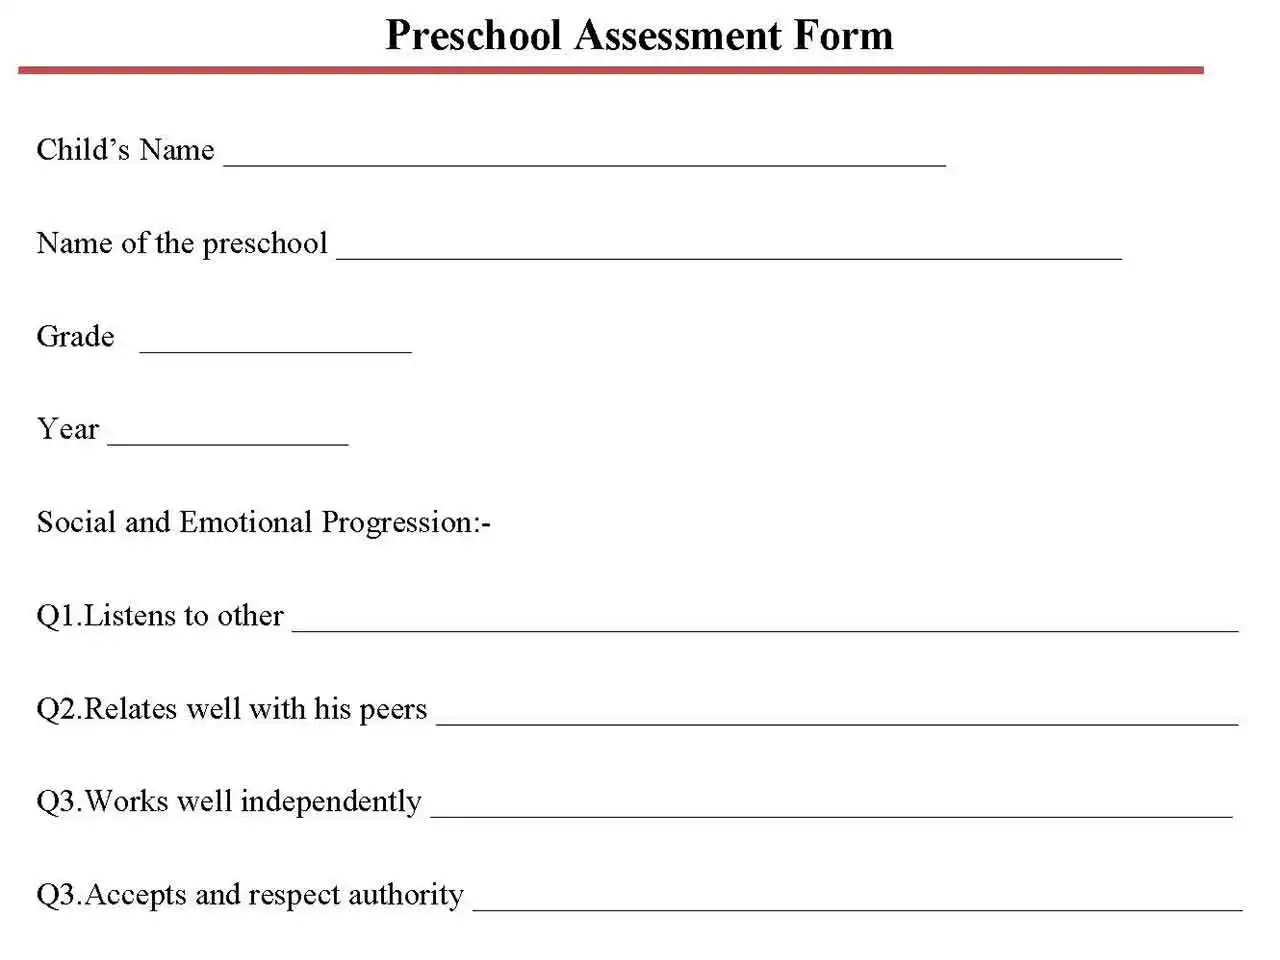 Preschool Assessment Fillable PDF Form And Word Document